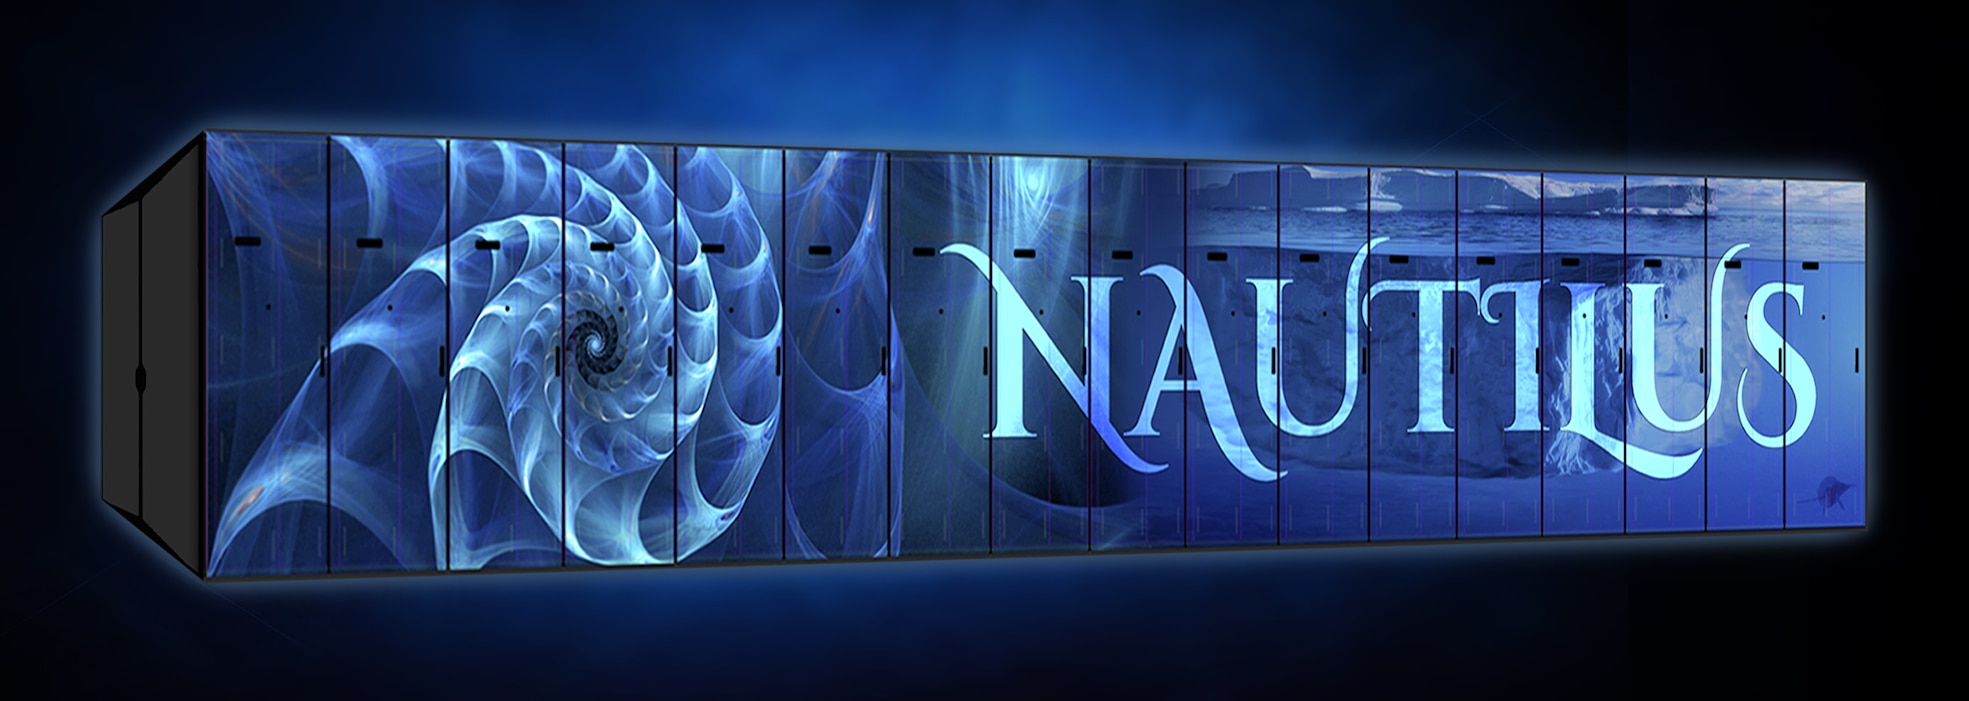 Nautilus is a Penguin TrueHPC supercomputer with a peak performance of 8.2 petaFLOPS, 176,128 compute cores, 382 TB of memory, and 26 petabytes of storage. It completed its final testing in April 2023 and features 48 GPU nodes.